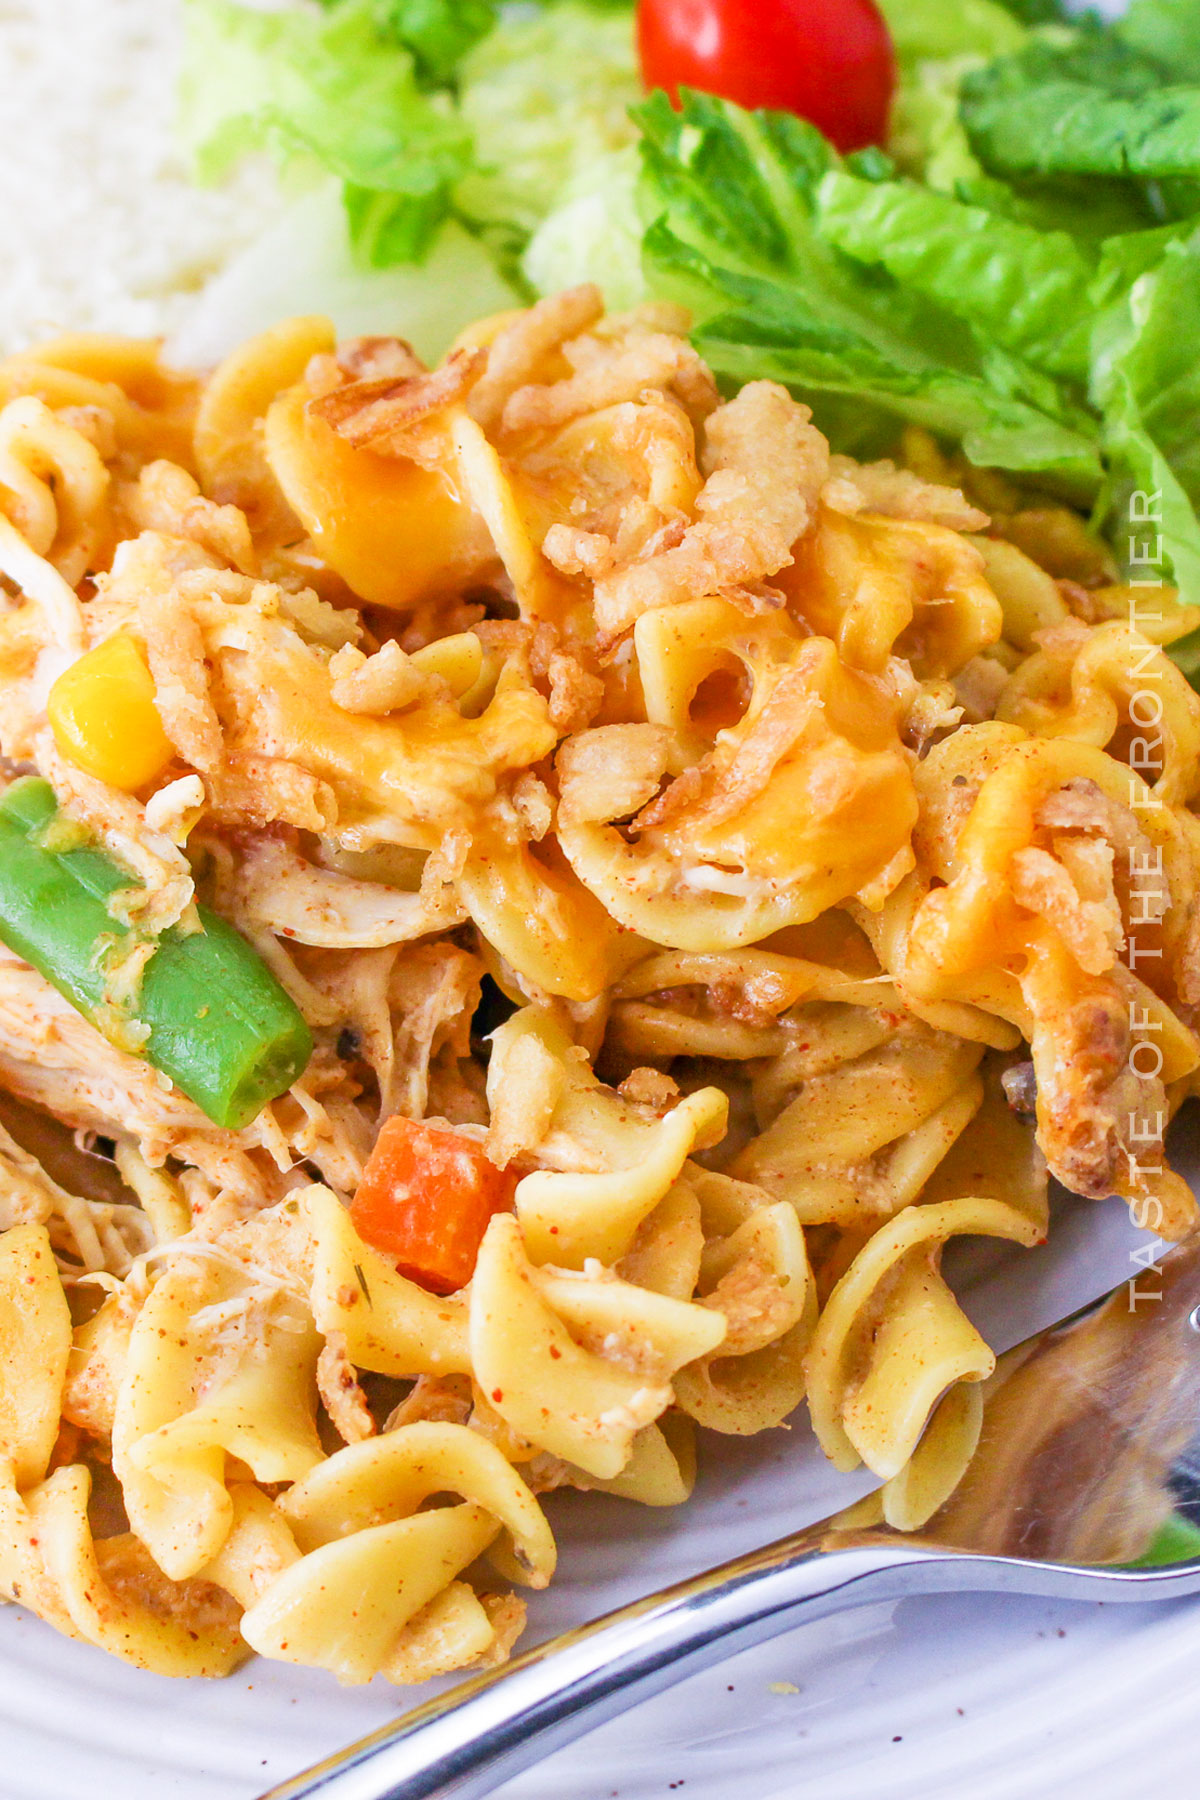 pasta noodles with chicken